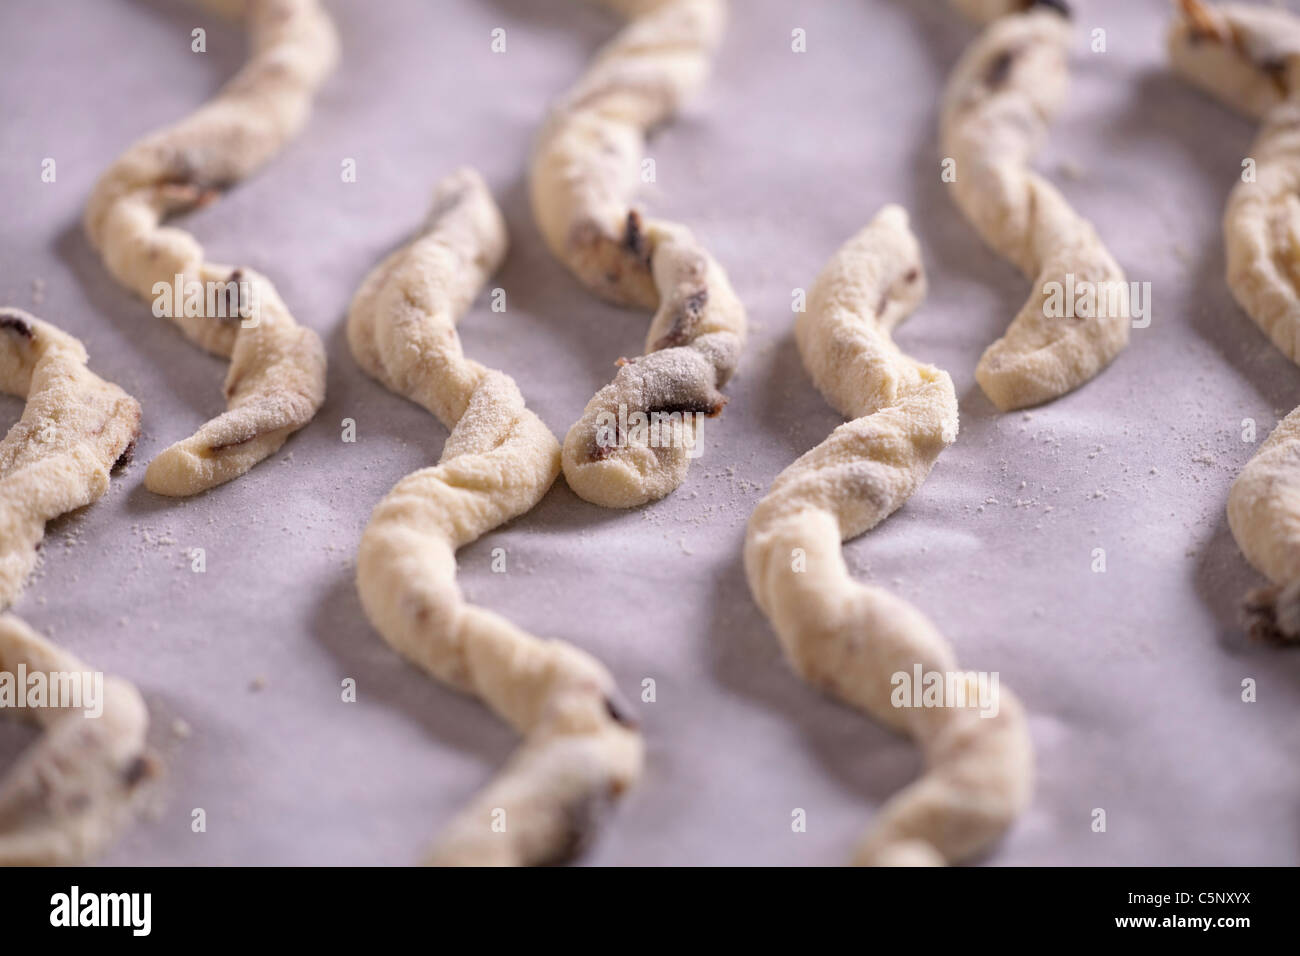 Raw grissini (bread sticks) with black olives Stock Photo